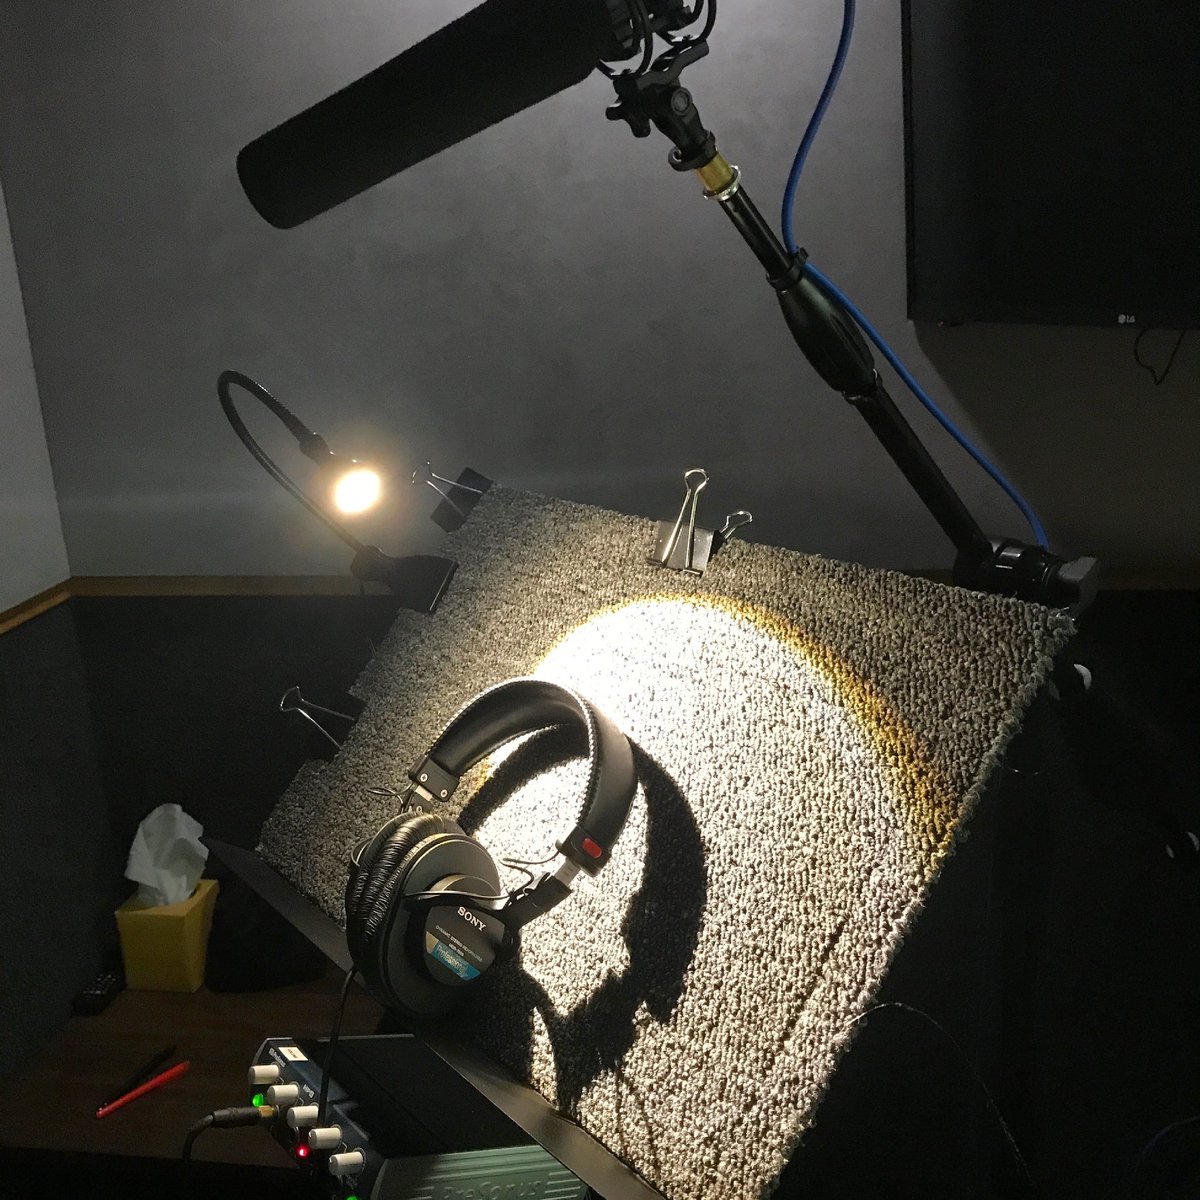 Early Monday! Who else out there is climbing out of bed and right into the booth? 

#acting #actingcoach #actingclass #childactor #locator #actor #actress #actorslife #voiceover #voiceovers #vo #voiceoverartist #voiceovertalent #volife #voiceacting #voiceactor #voiceactorslife